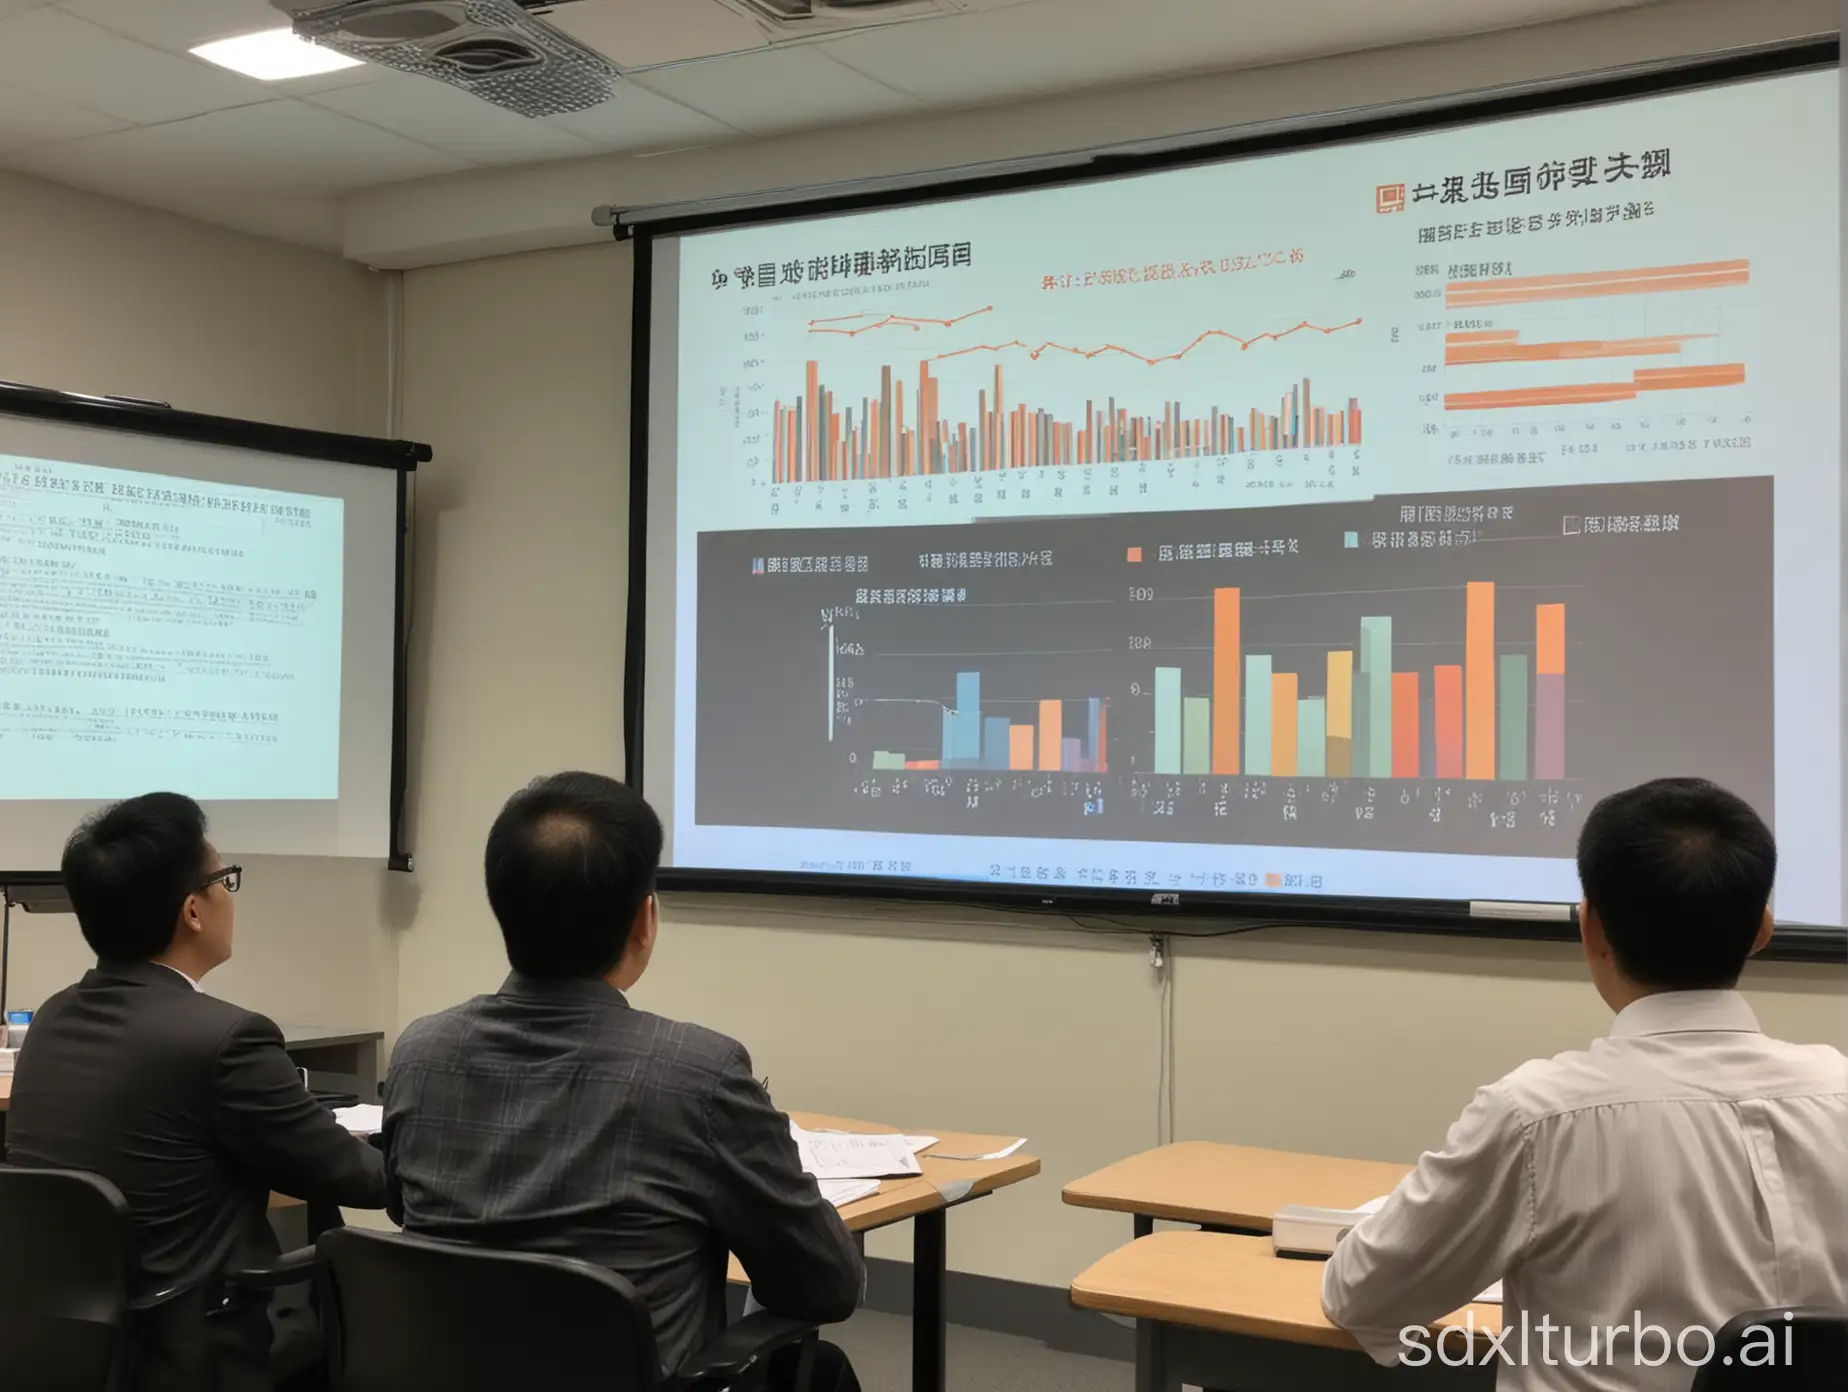 A senior Chinese lecturer is using projection PPT for data-related explanations, including bar charts, line graphs, etc., while a group of corporate managers below are keeping learning records.